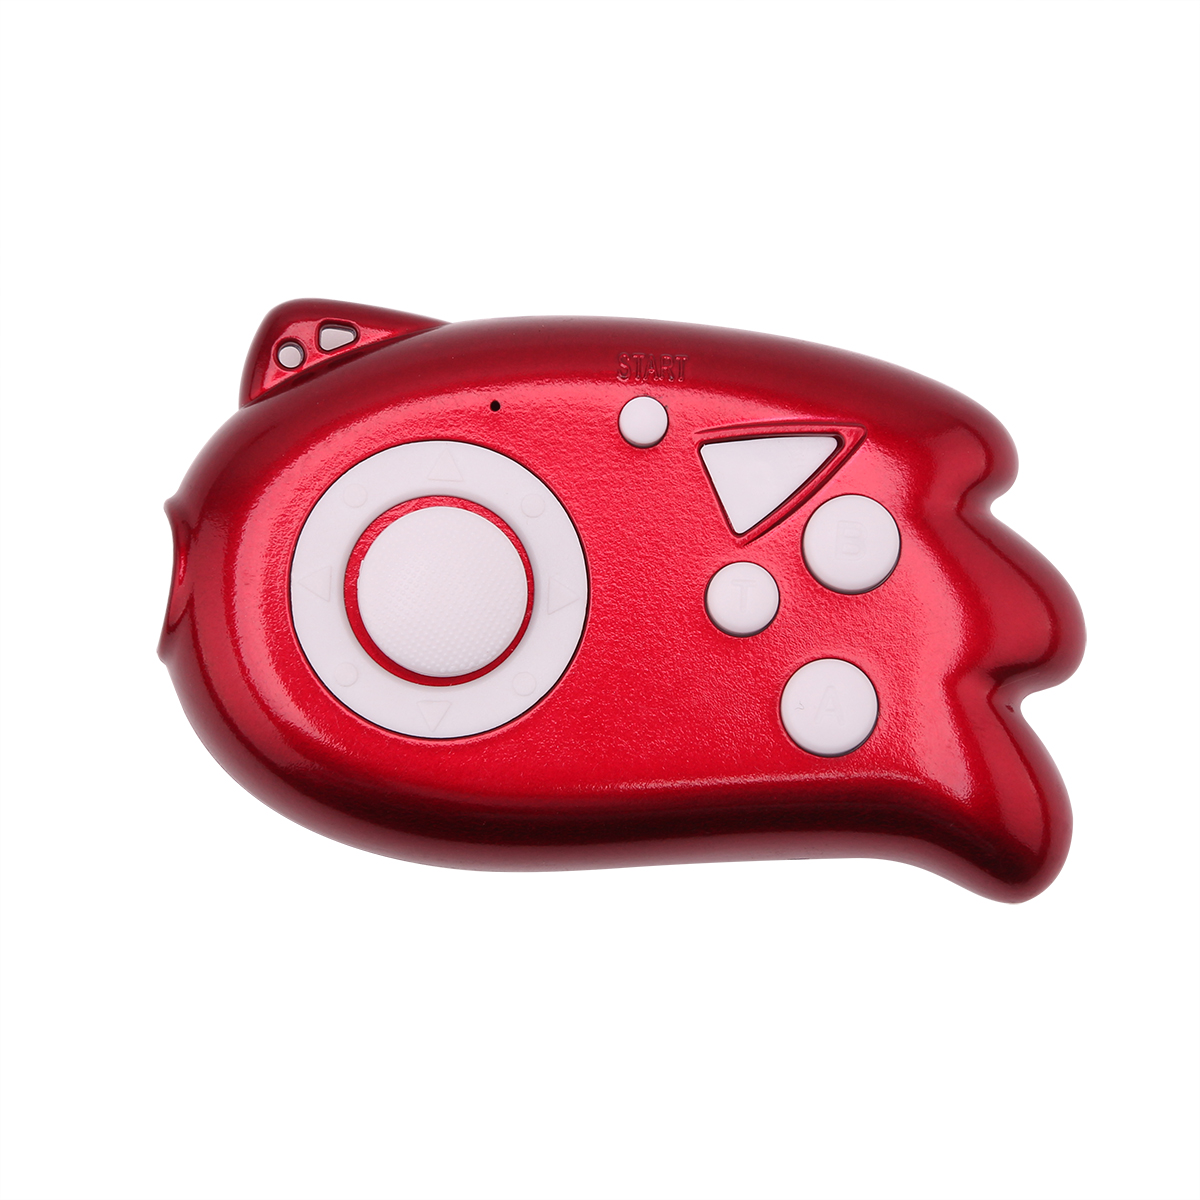 Game Player Child Gift Toys Retro Mini Handheld Game Console Player Plug 89 Classic Games Support TV Output Plug & Play Bit